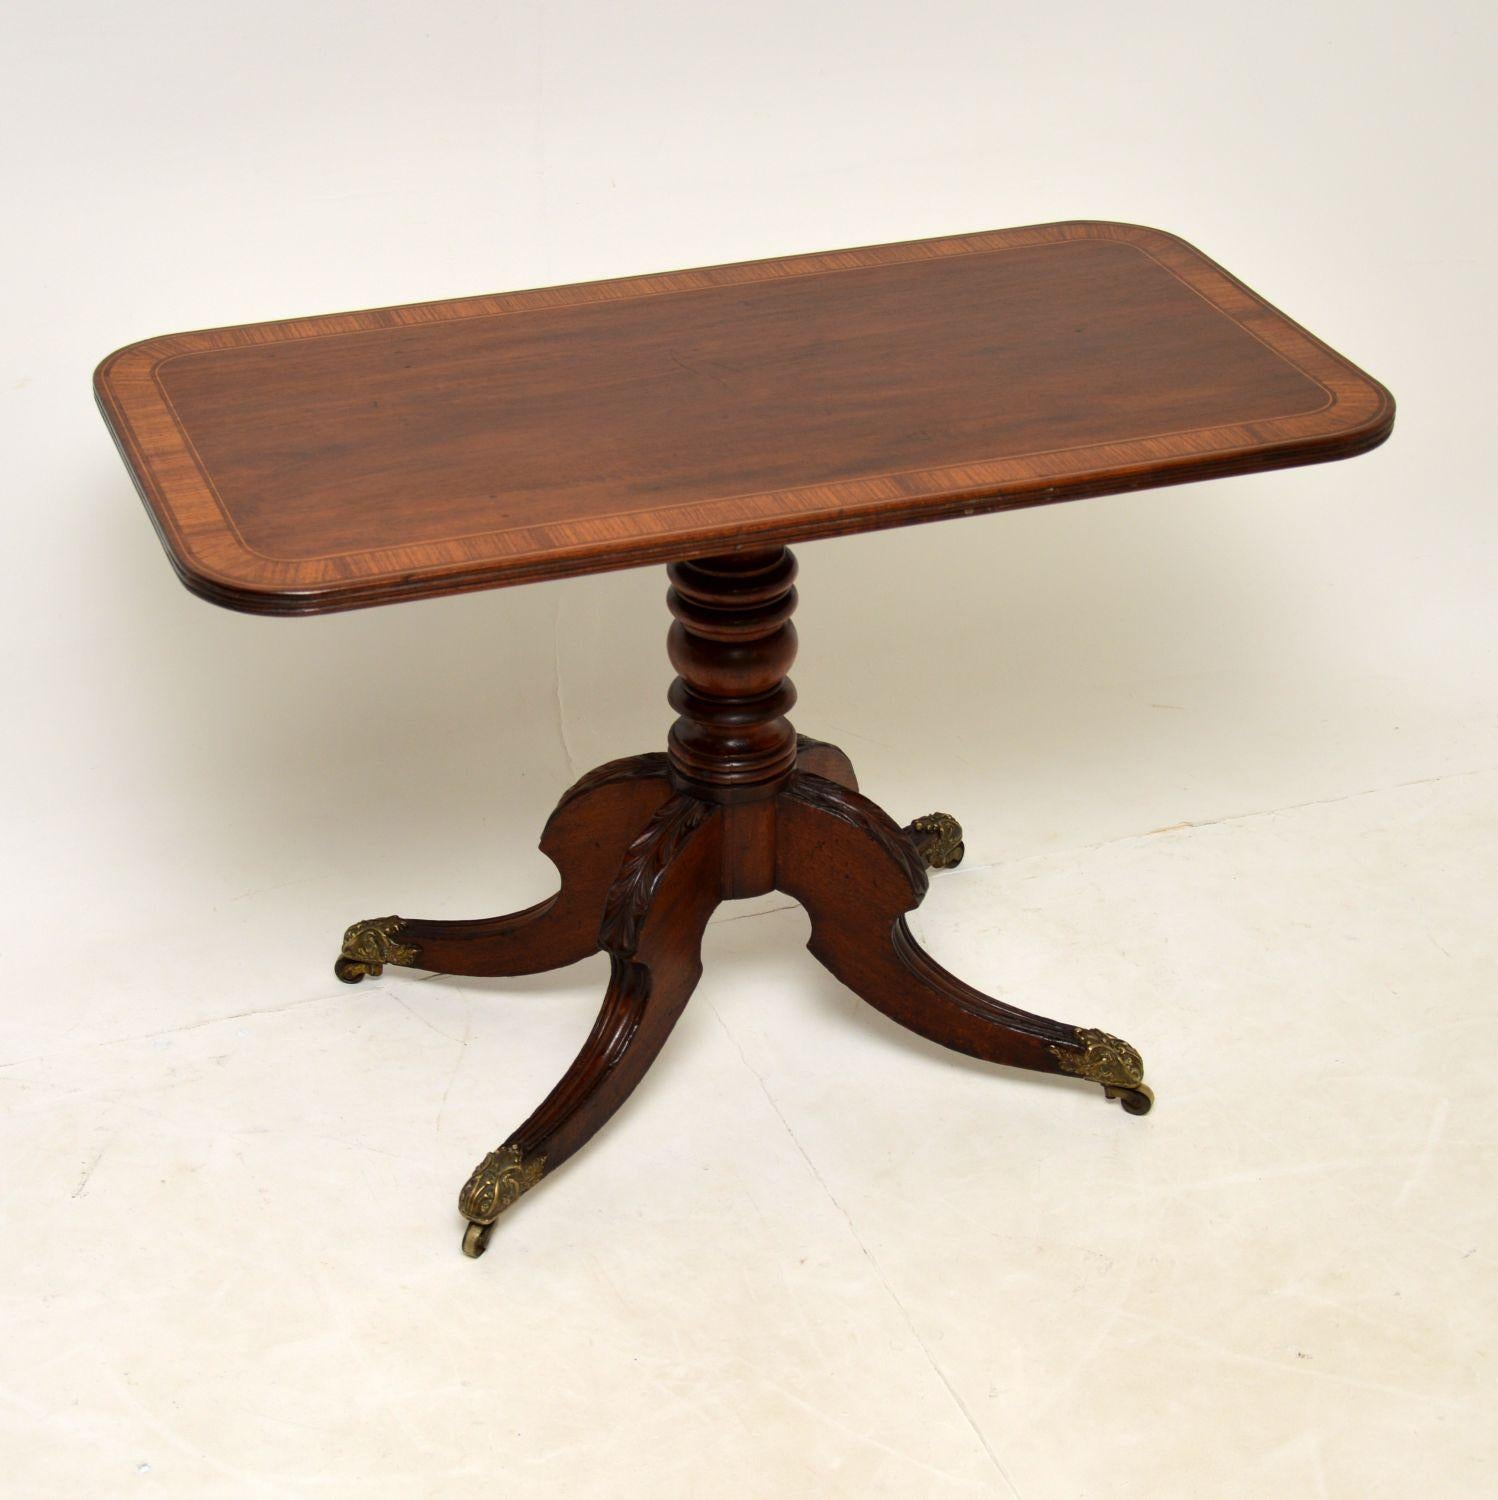 A stunning and very rare English Regency period occasional or side table in Mahogany, dating from around the 1800-1820 period.

Beautifully made from solid mahogany and cross banded satin wood, this is of extremely fine quality. The brass feet